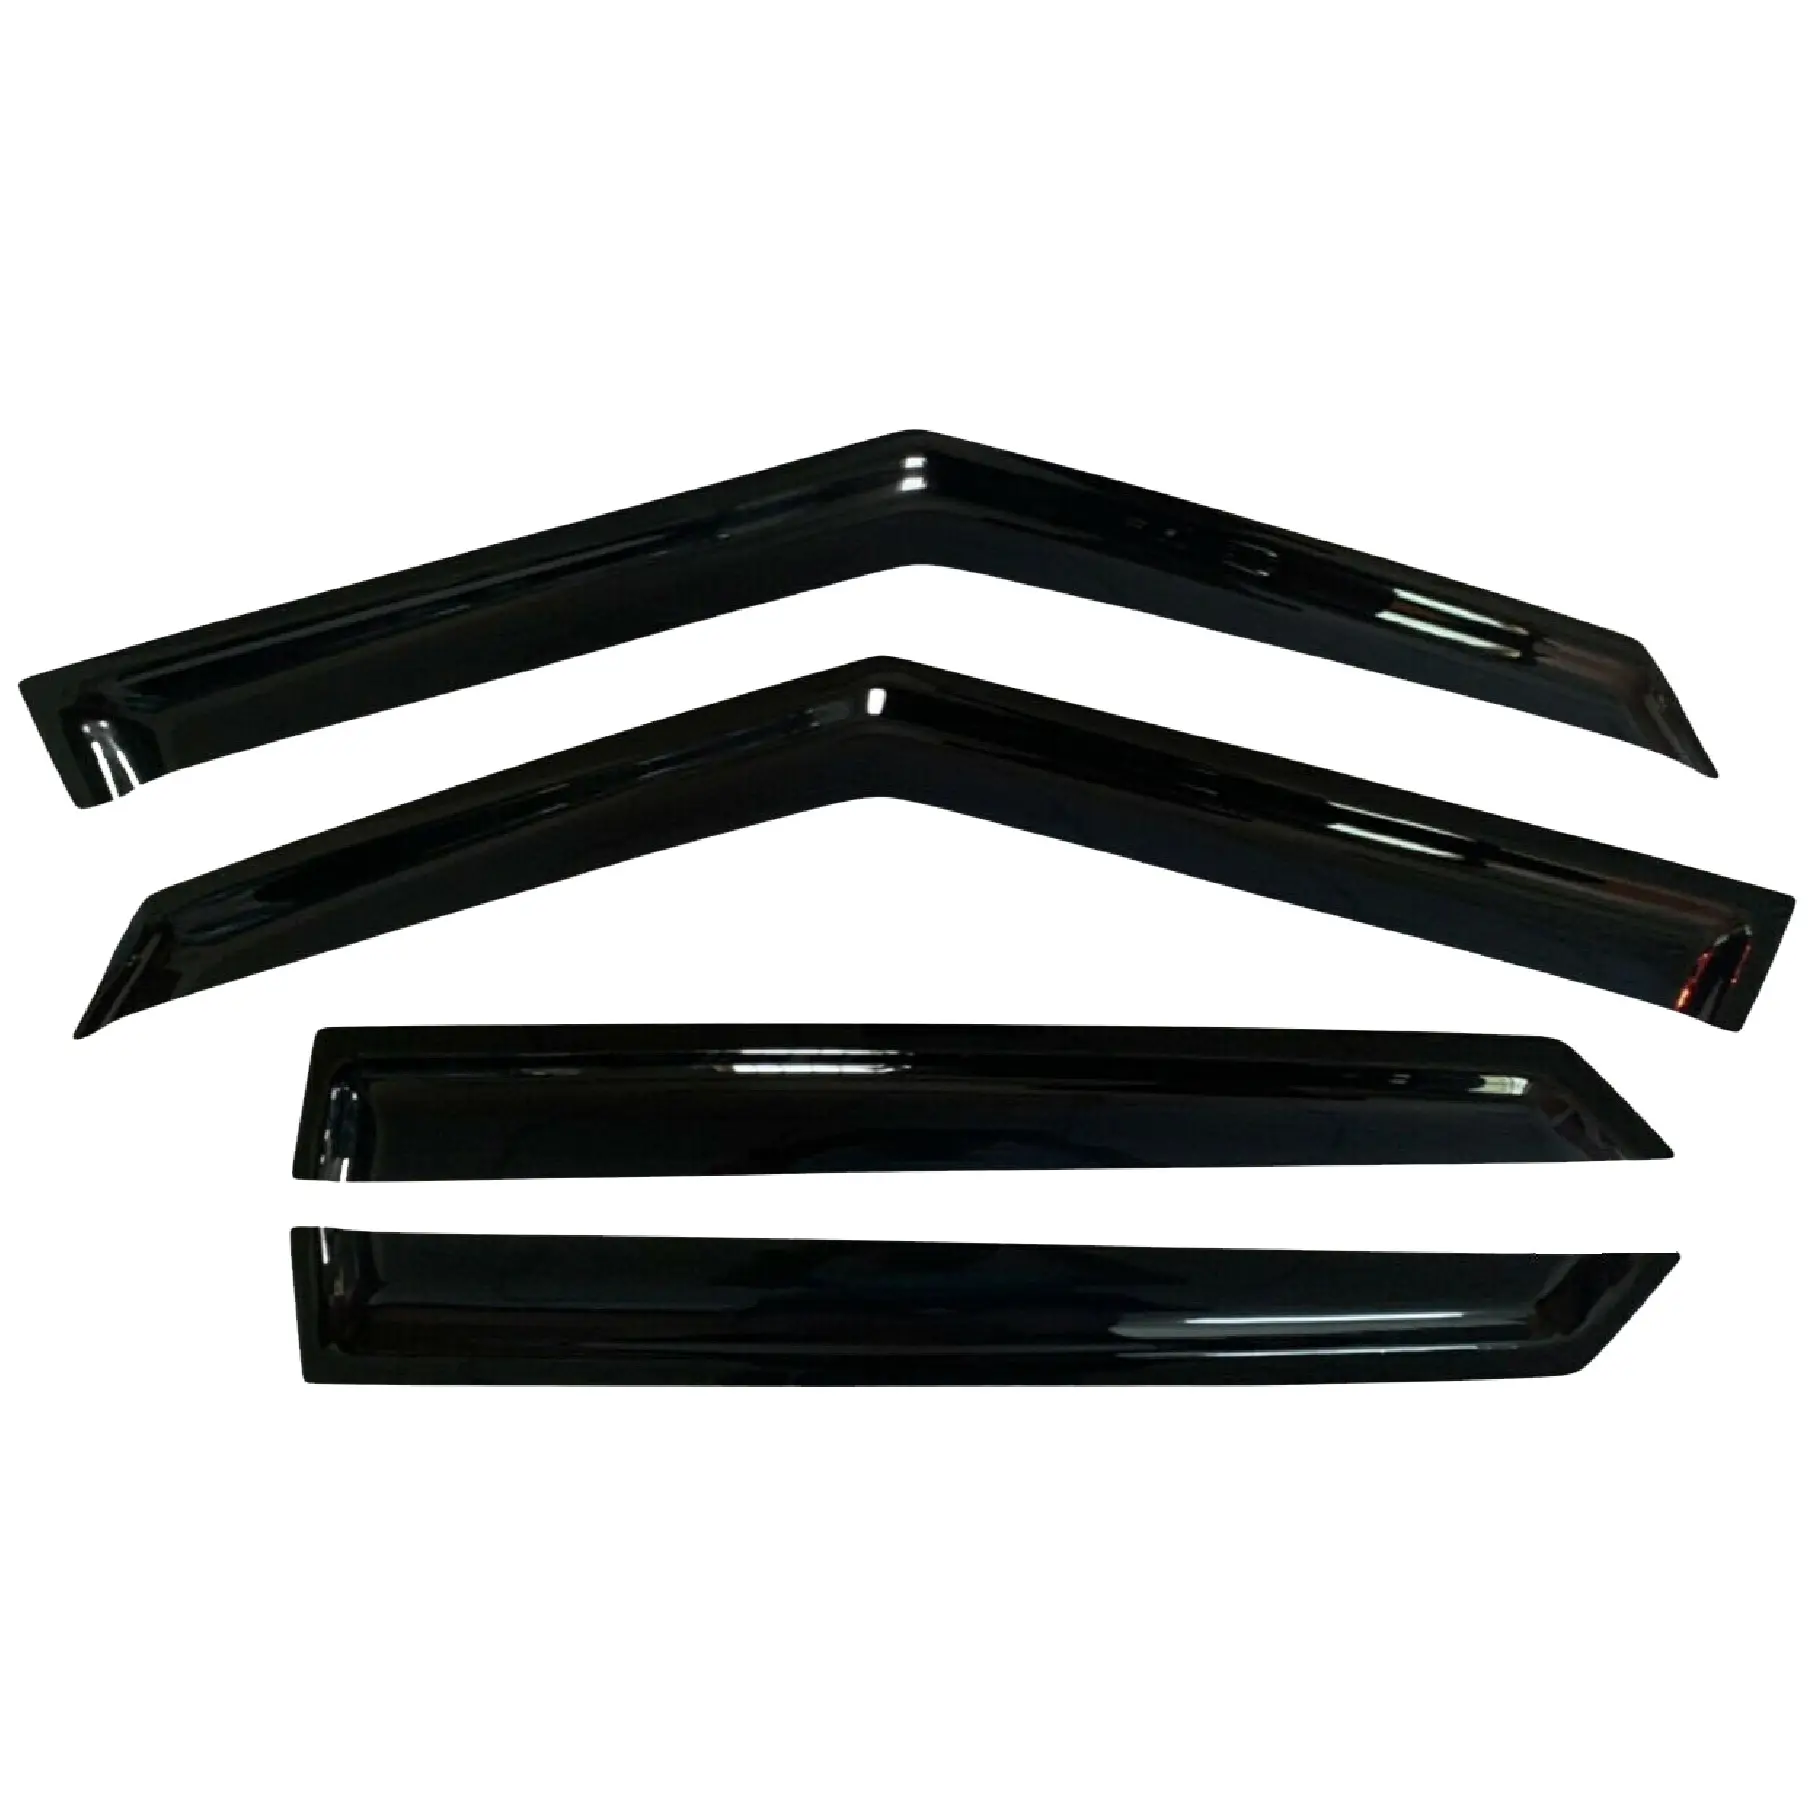 High quality acrylic plastic With Double adhesive tape car window visor for hyundai venue 2020-on car accessories